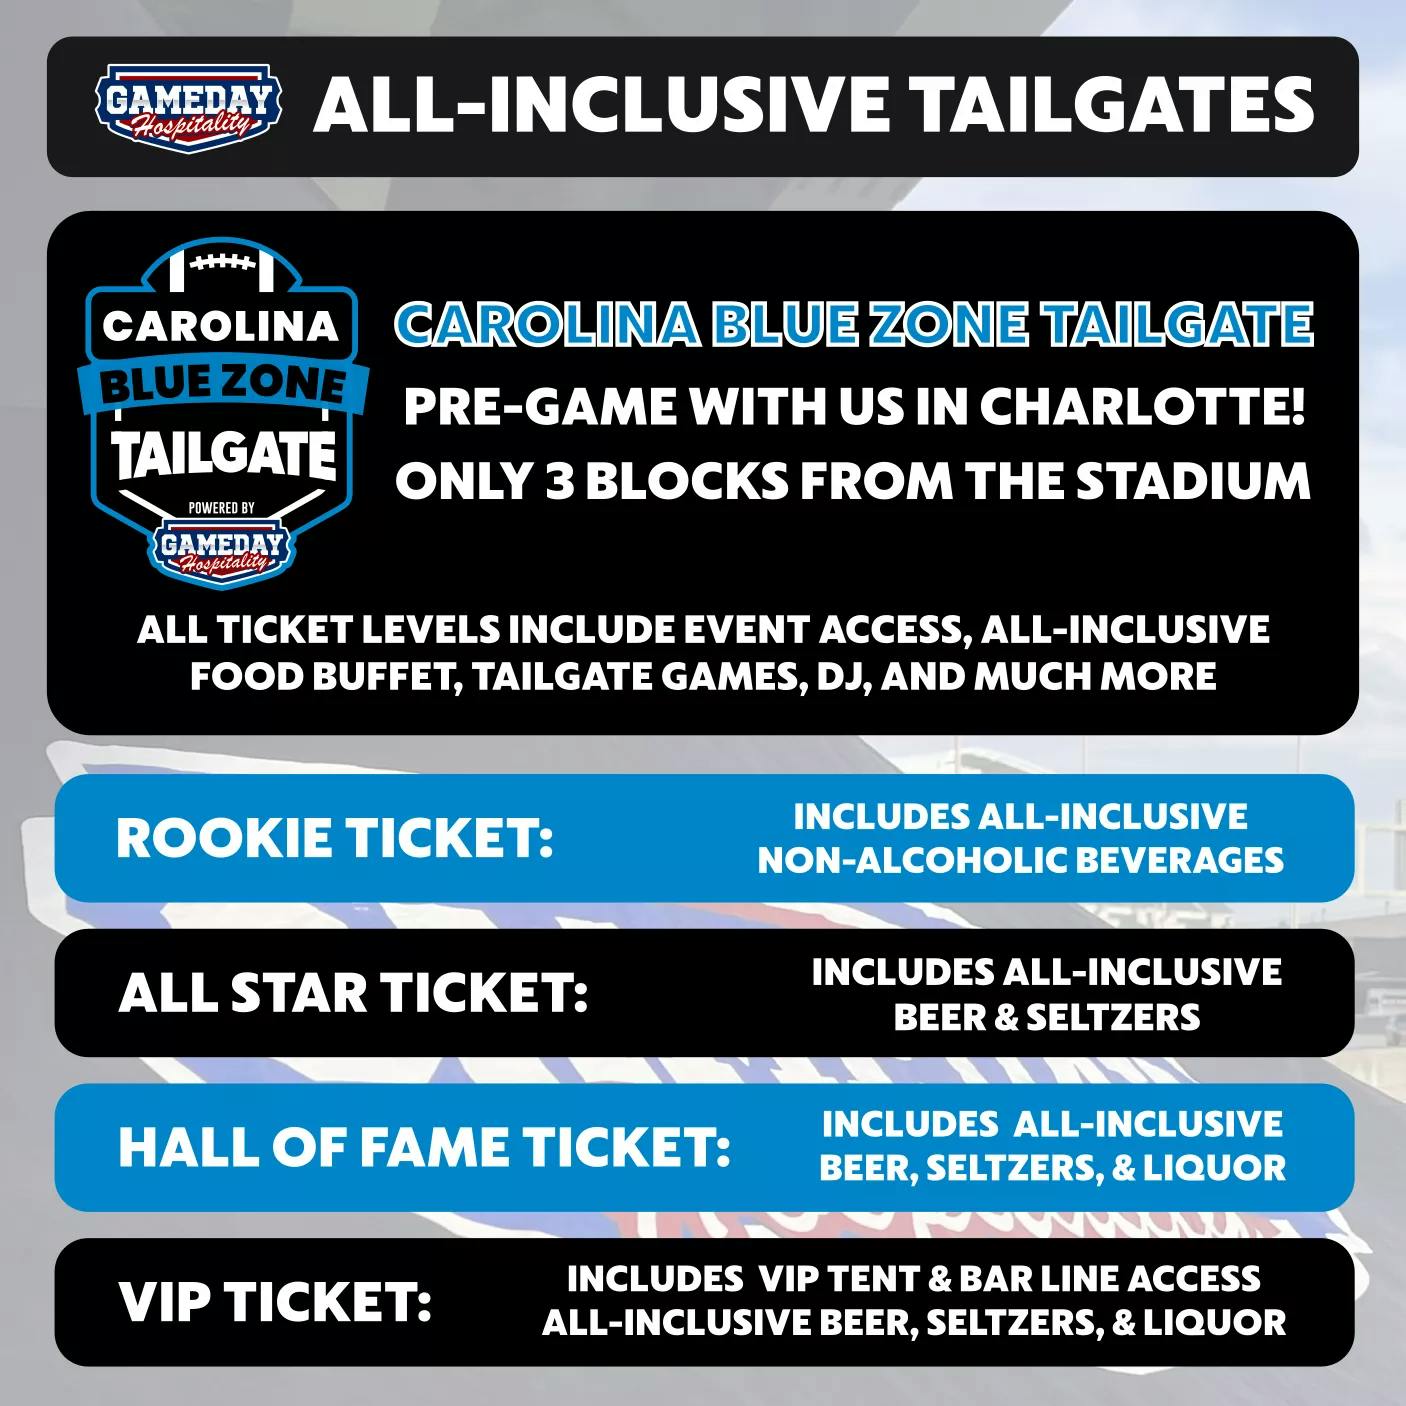 GAMEDAY HOSPITALITY CHARLOTTE PANTHERS TAILGATE Seating Map Seating Chart